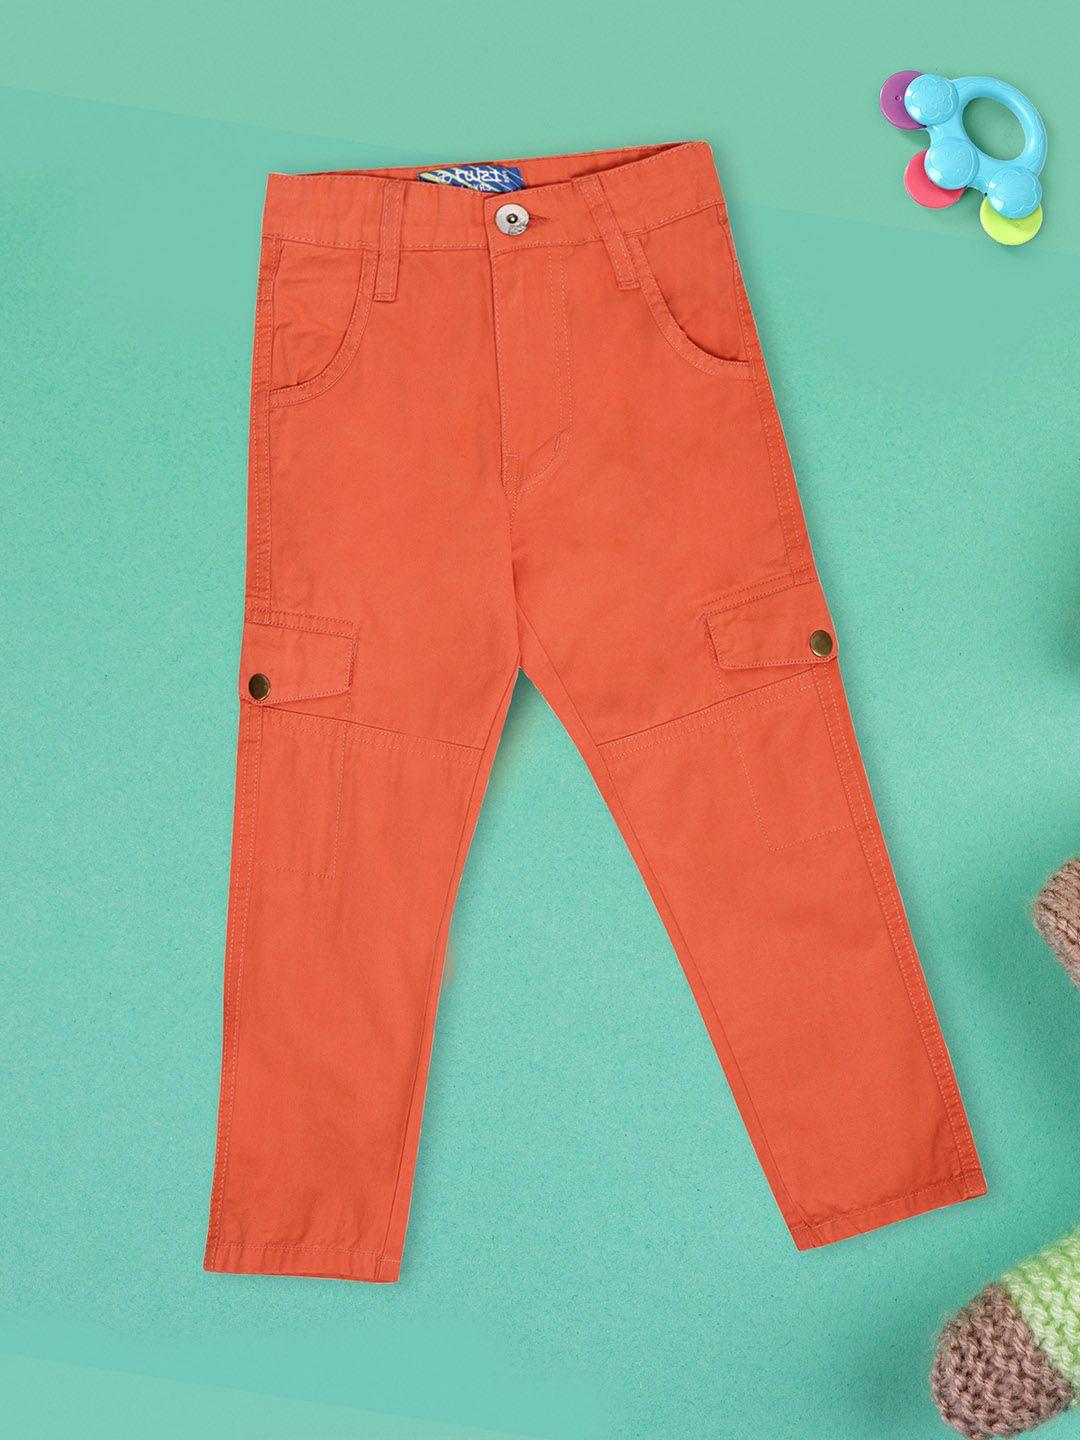 v-mart-boys-twill-mid-rise-cotton-cargos-trousers